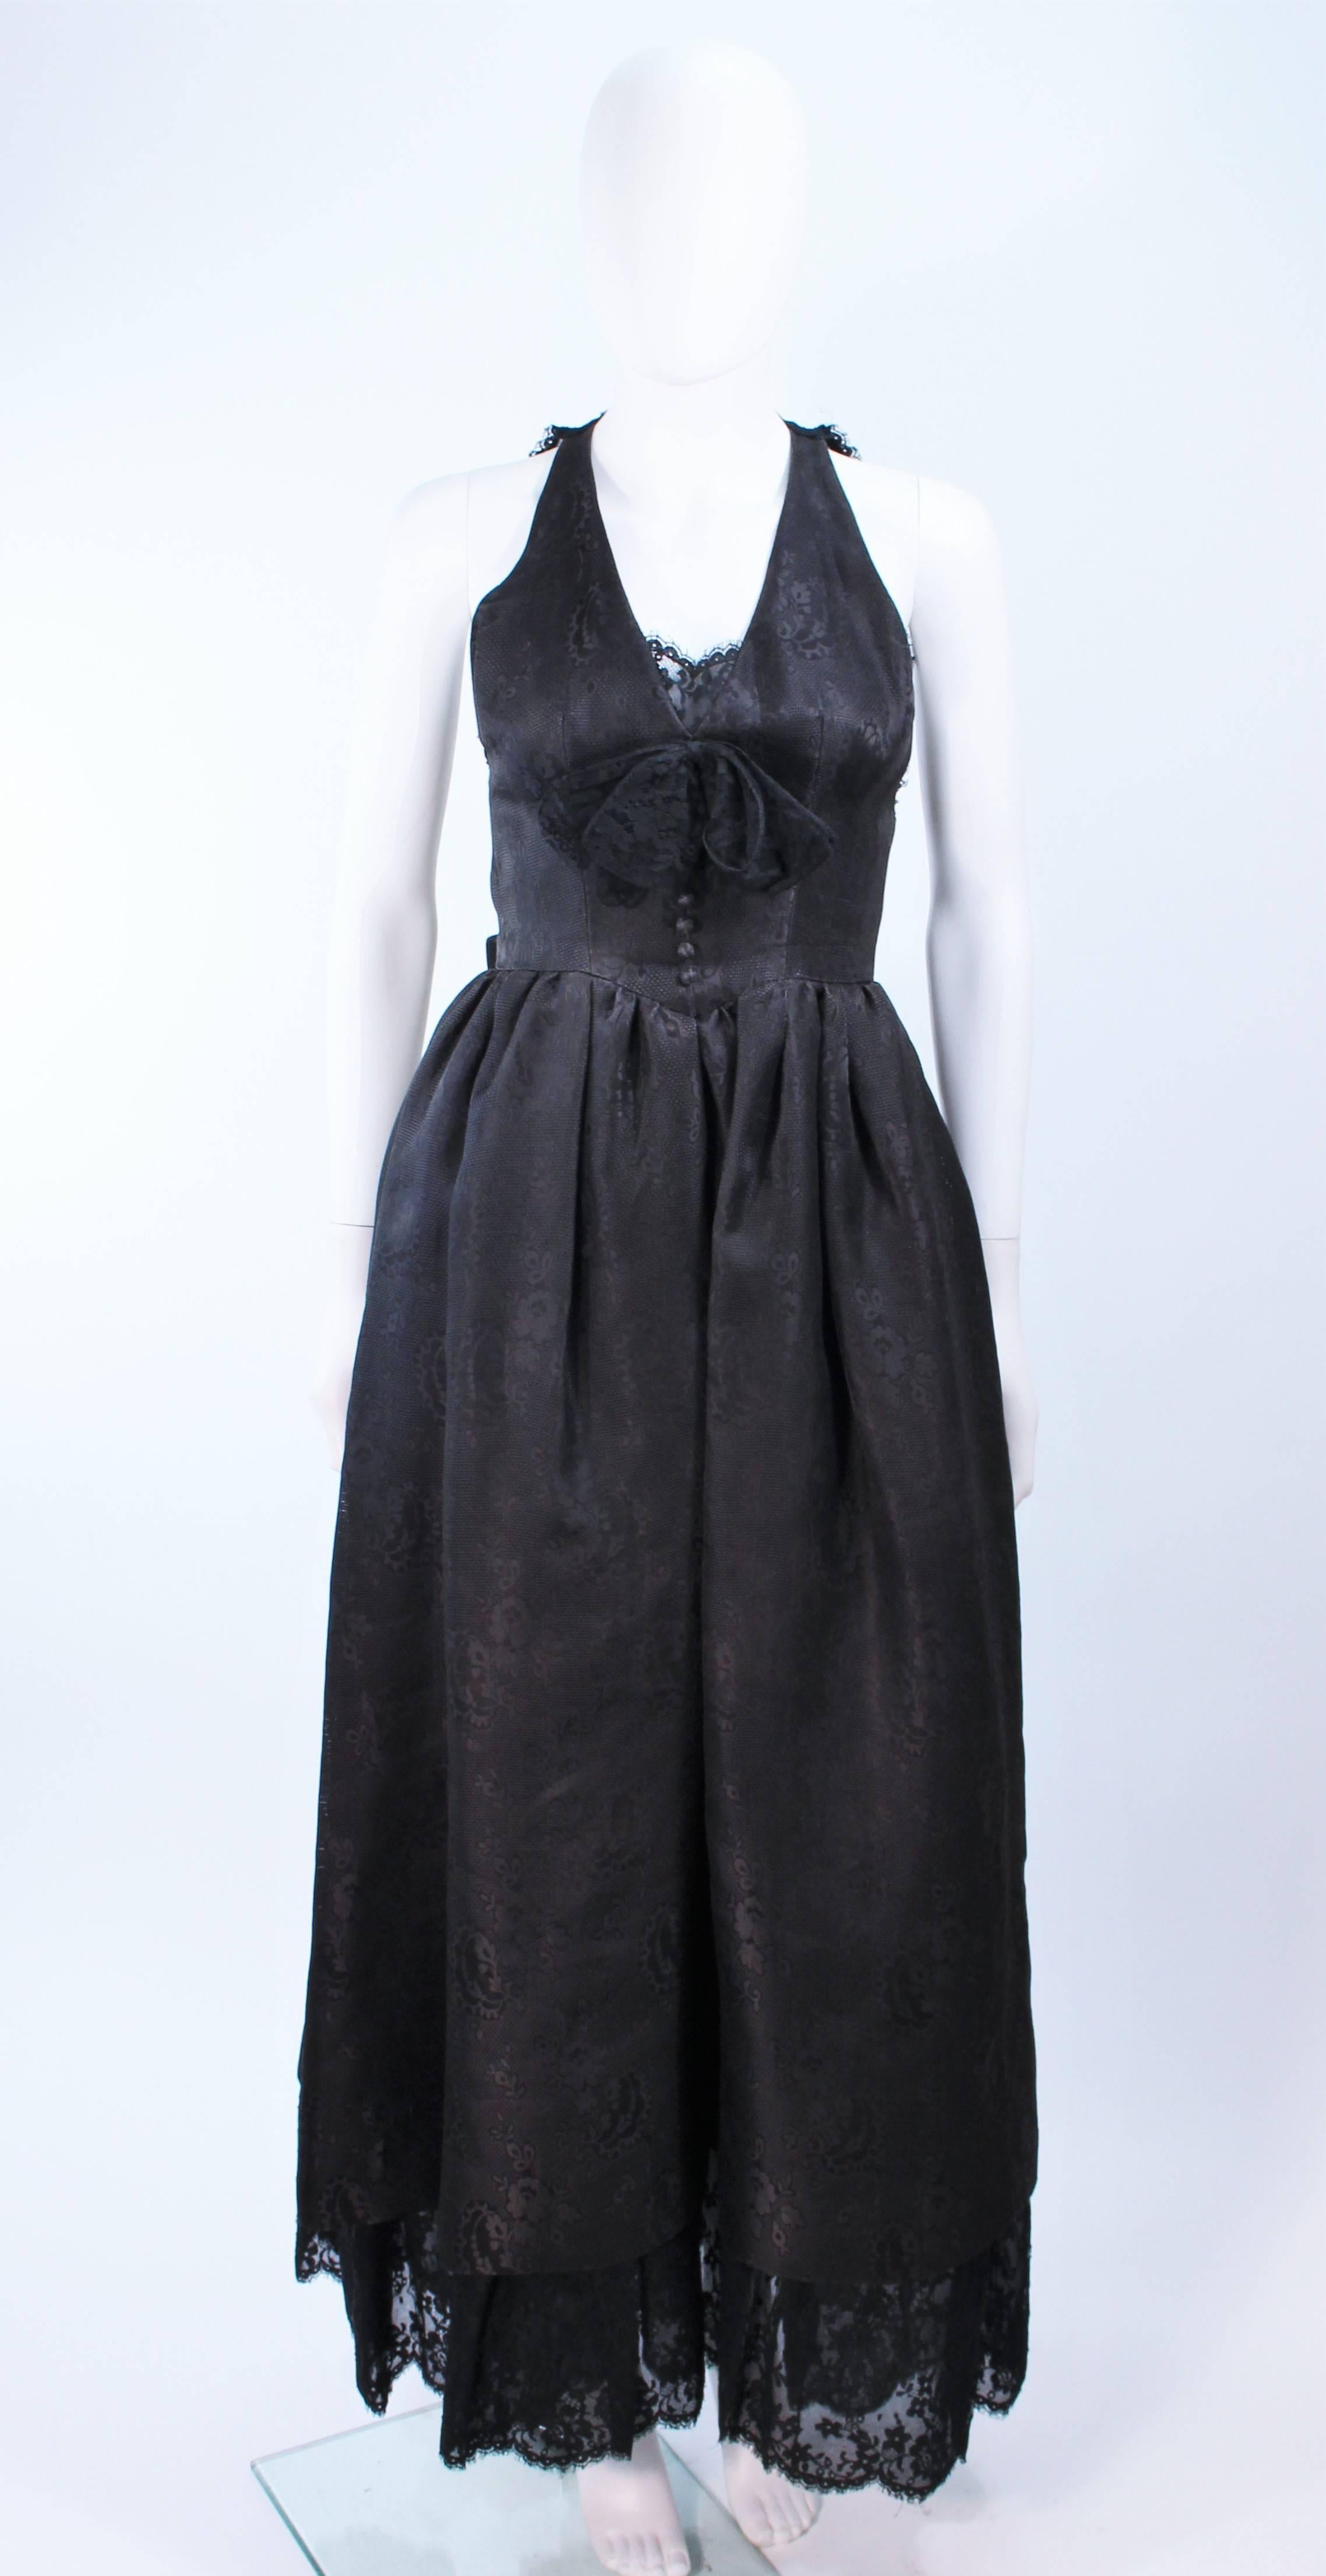 This Nina Ricci design is composed of a black brocade with lace. Features an interior crinoline skirt and lace halter backing. In excellent vintage condition. Due to the petite nature of this item the back is not completely zipped to the top of the